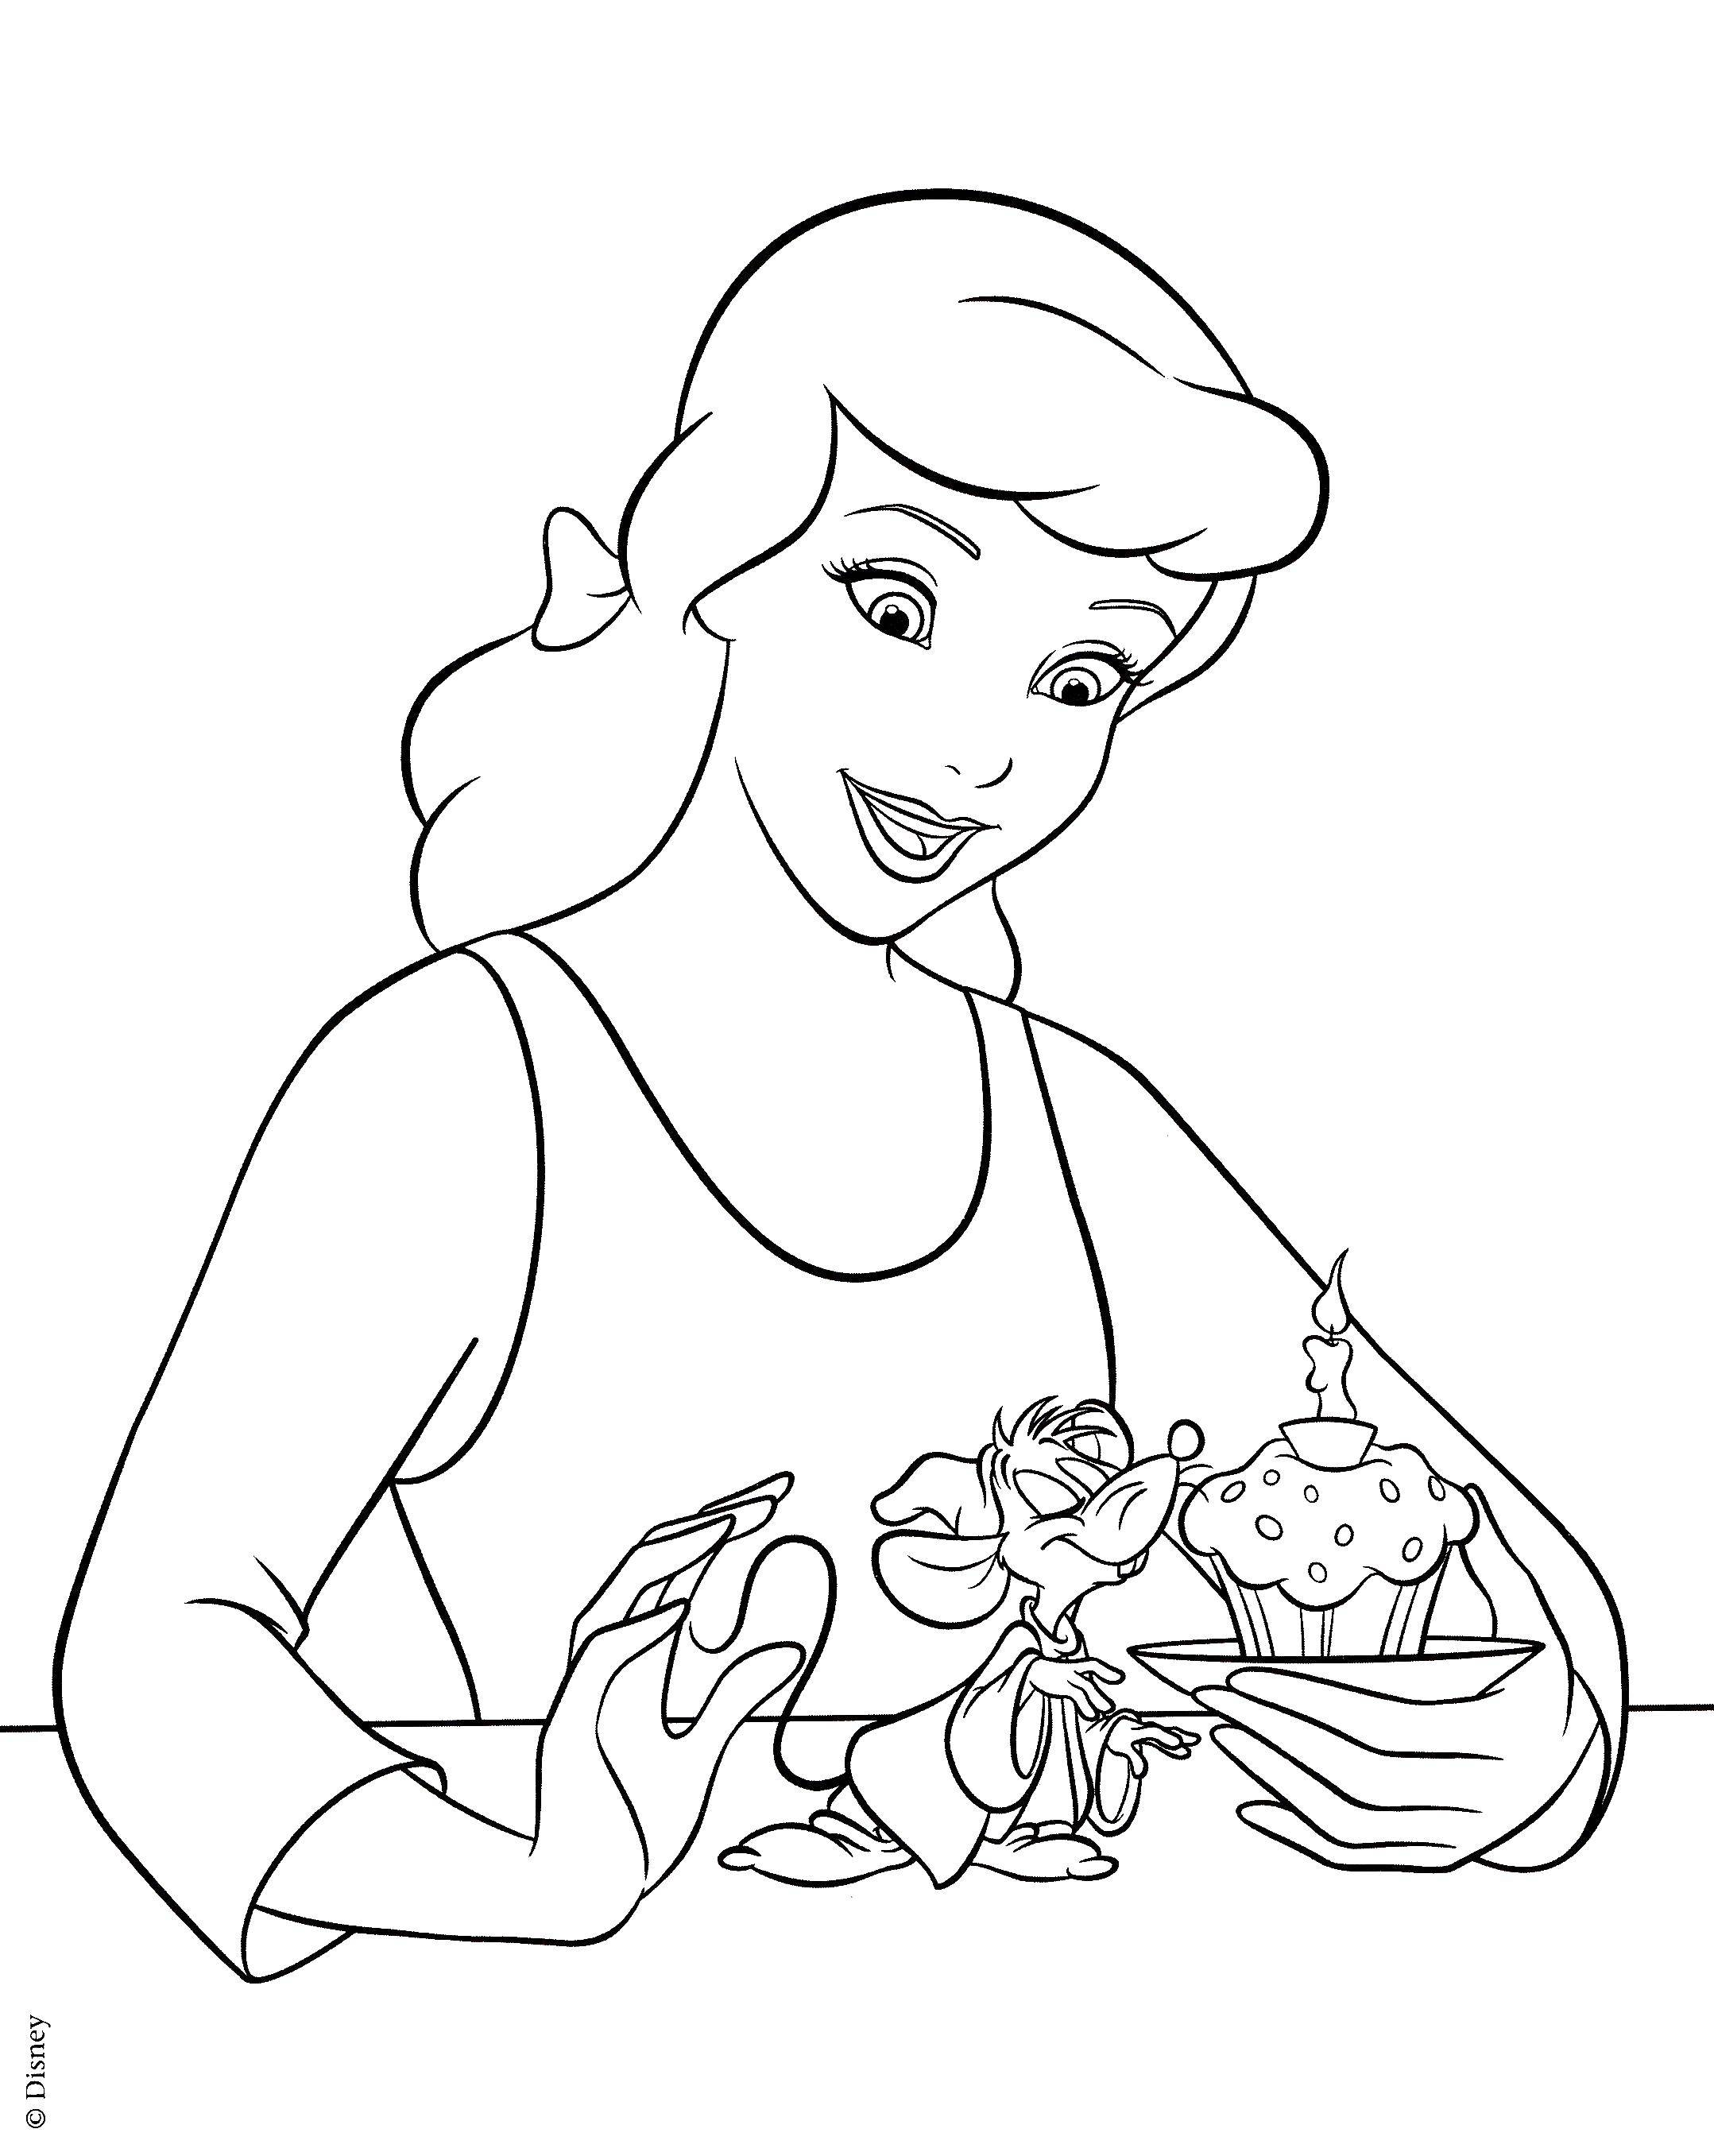 Coloring Cinderella with friend mouse. Category Disney coloring pages. Tags:  Disney, Cinderella.